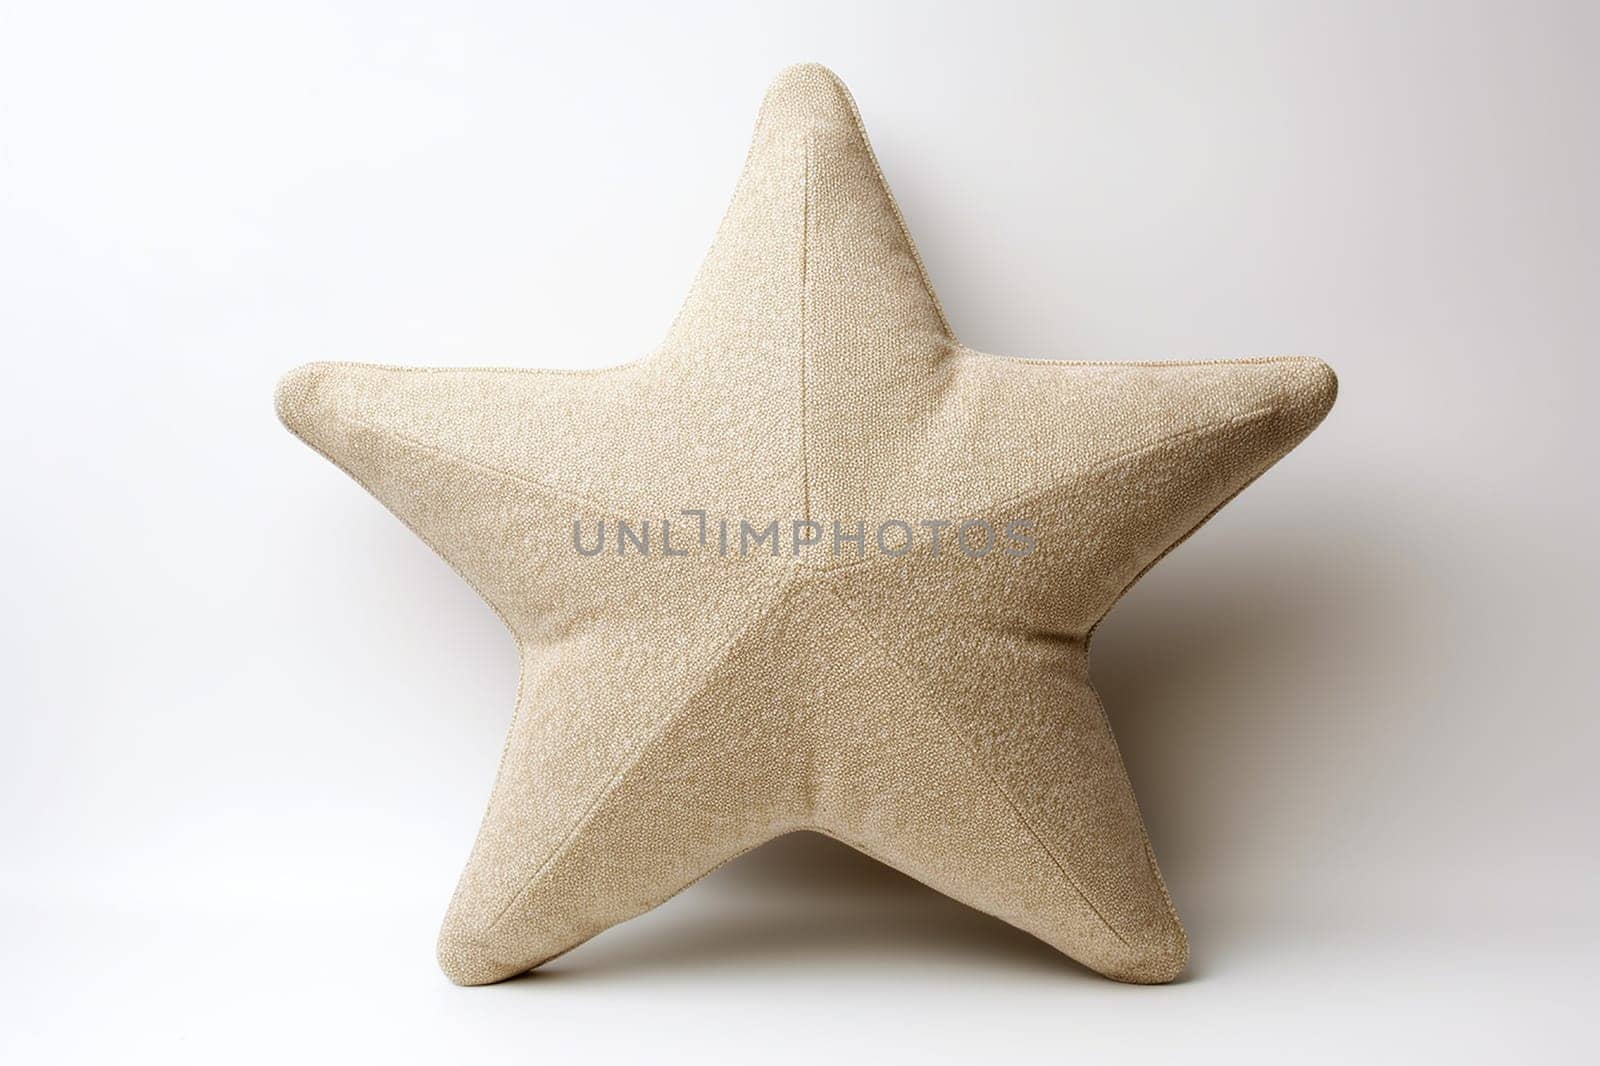 Beige star-shaped cushion against a white backdrop by Hype2art